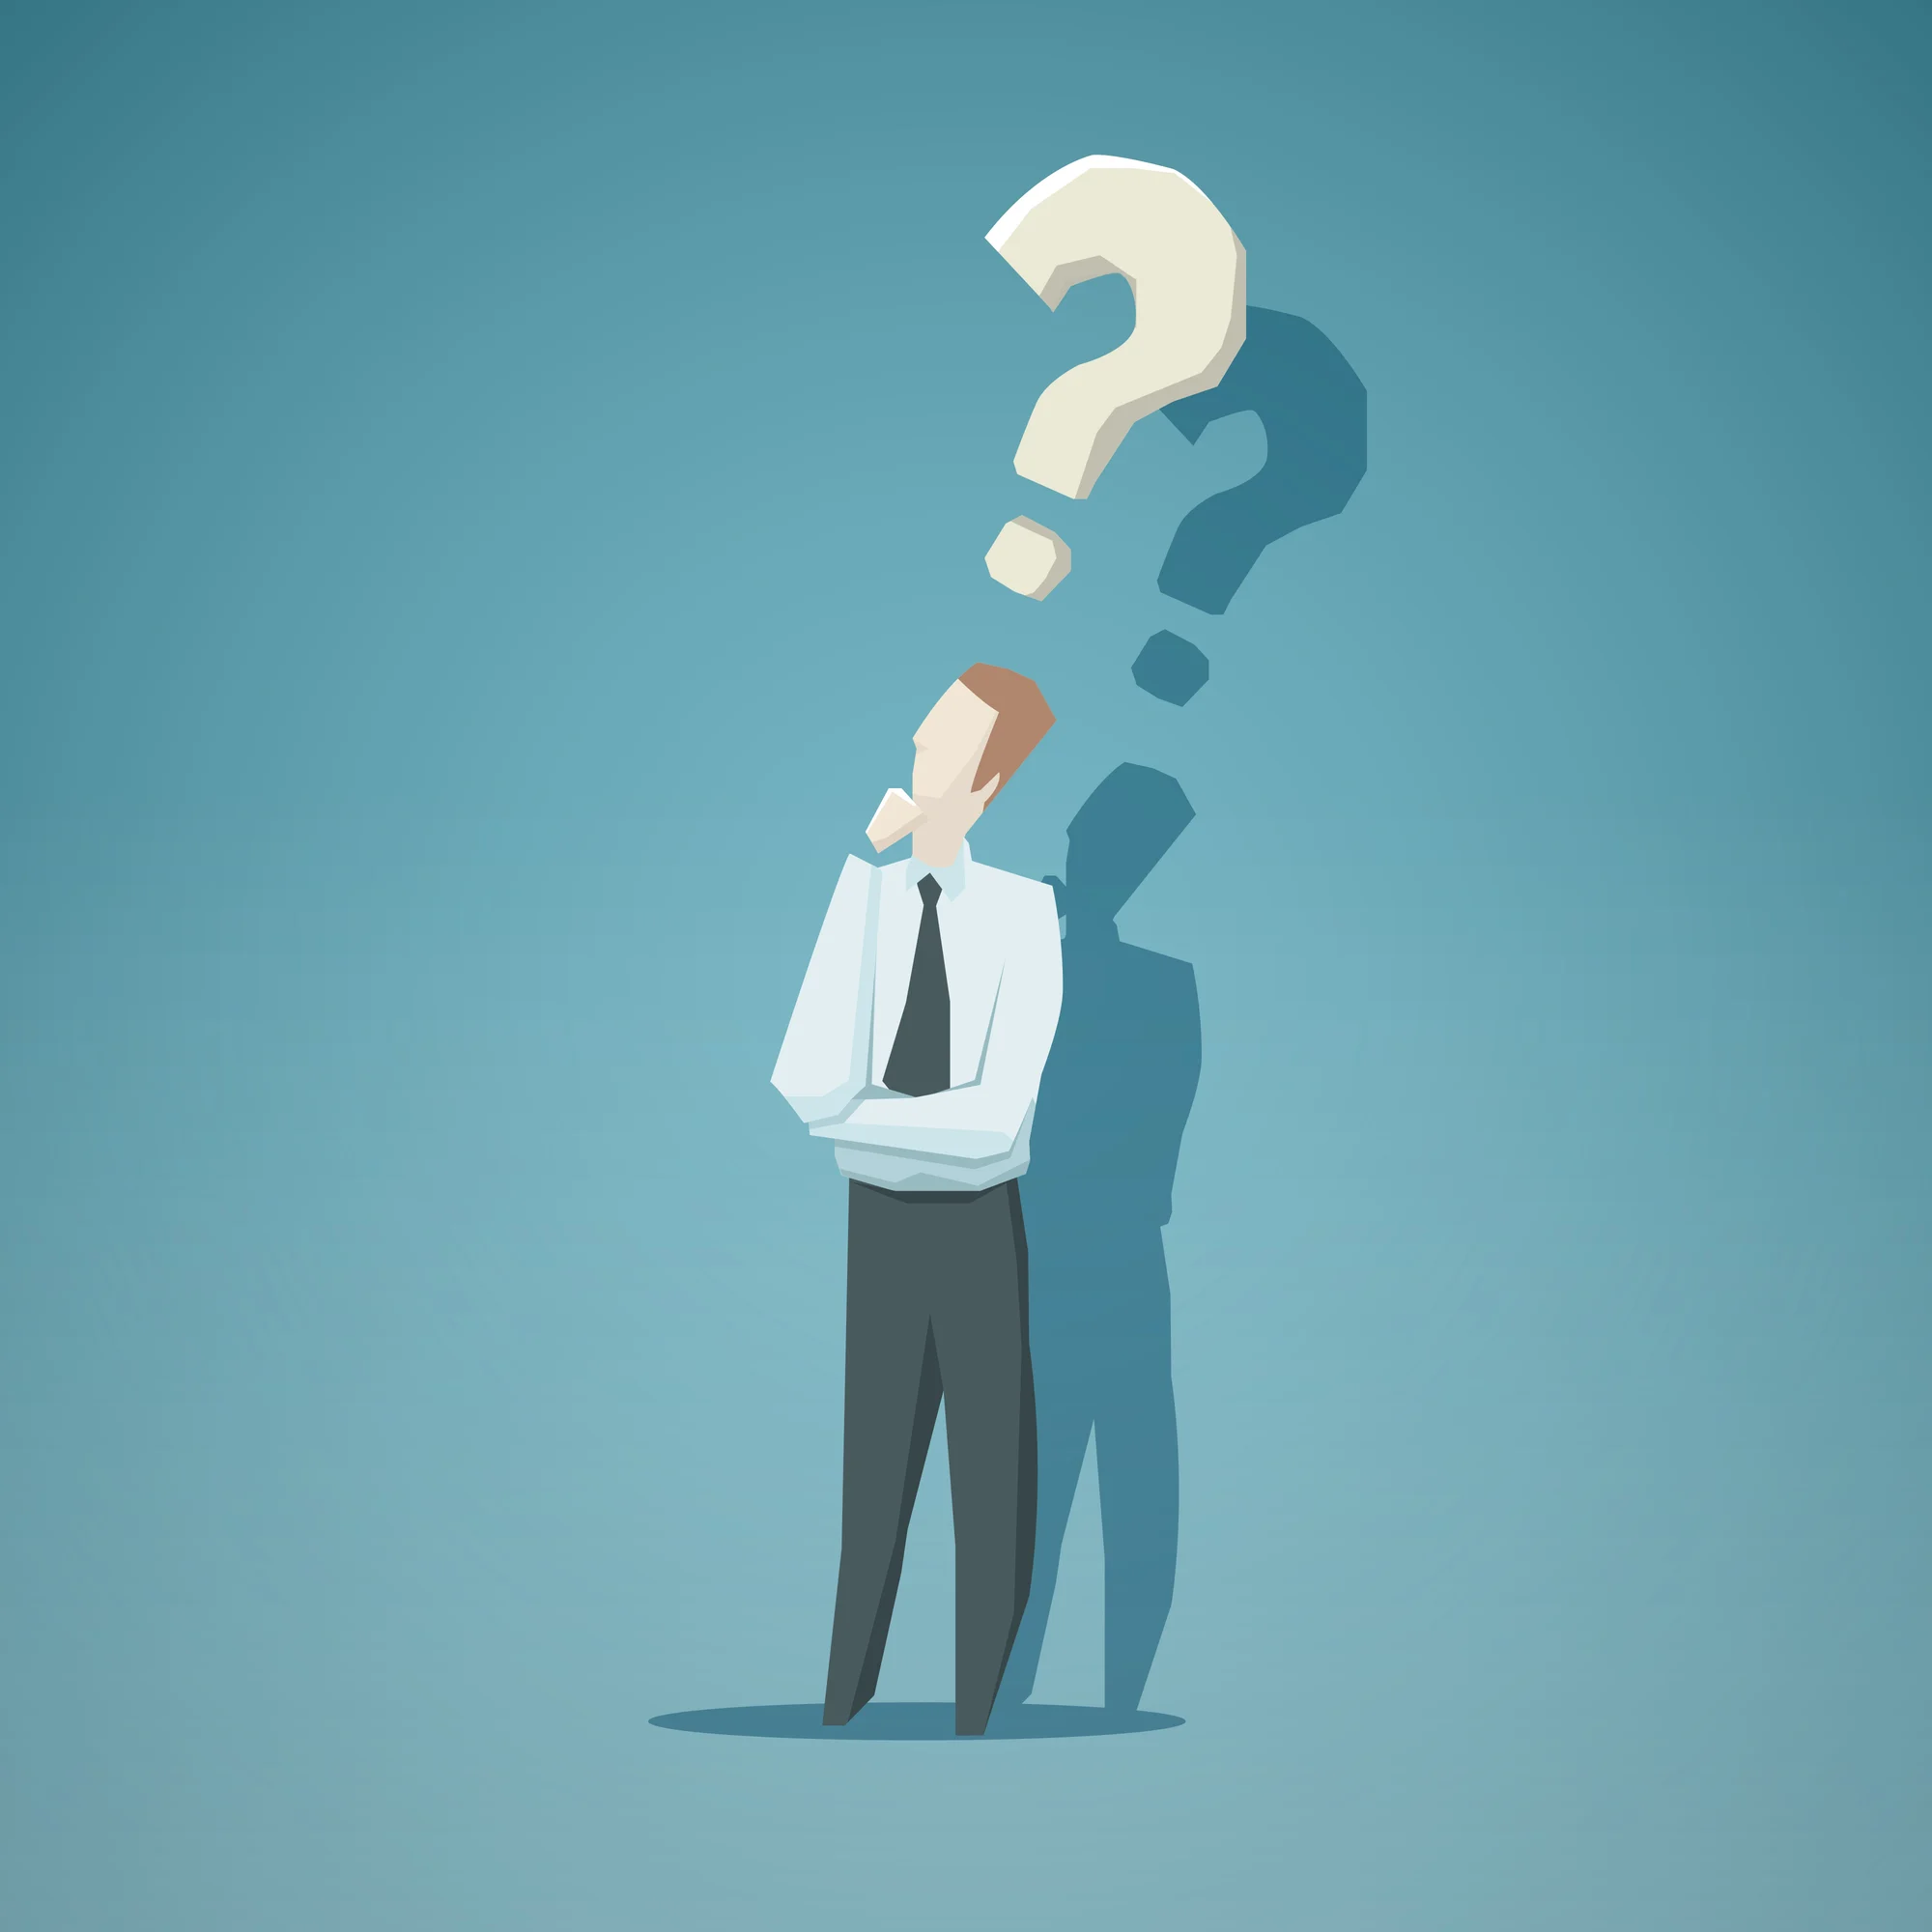 10 questions to ask before you hire an analyst